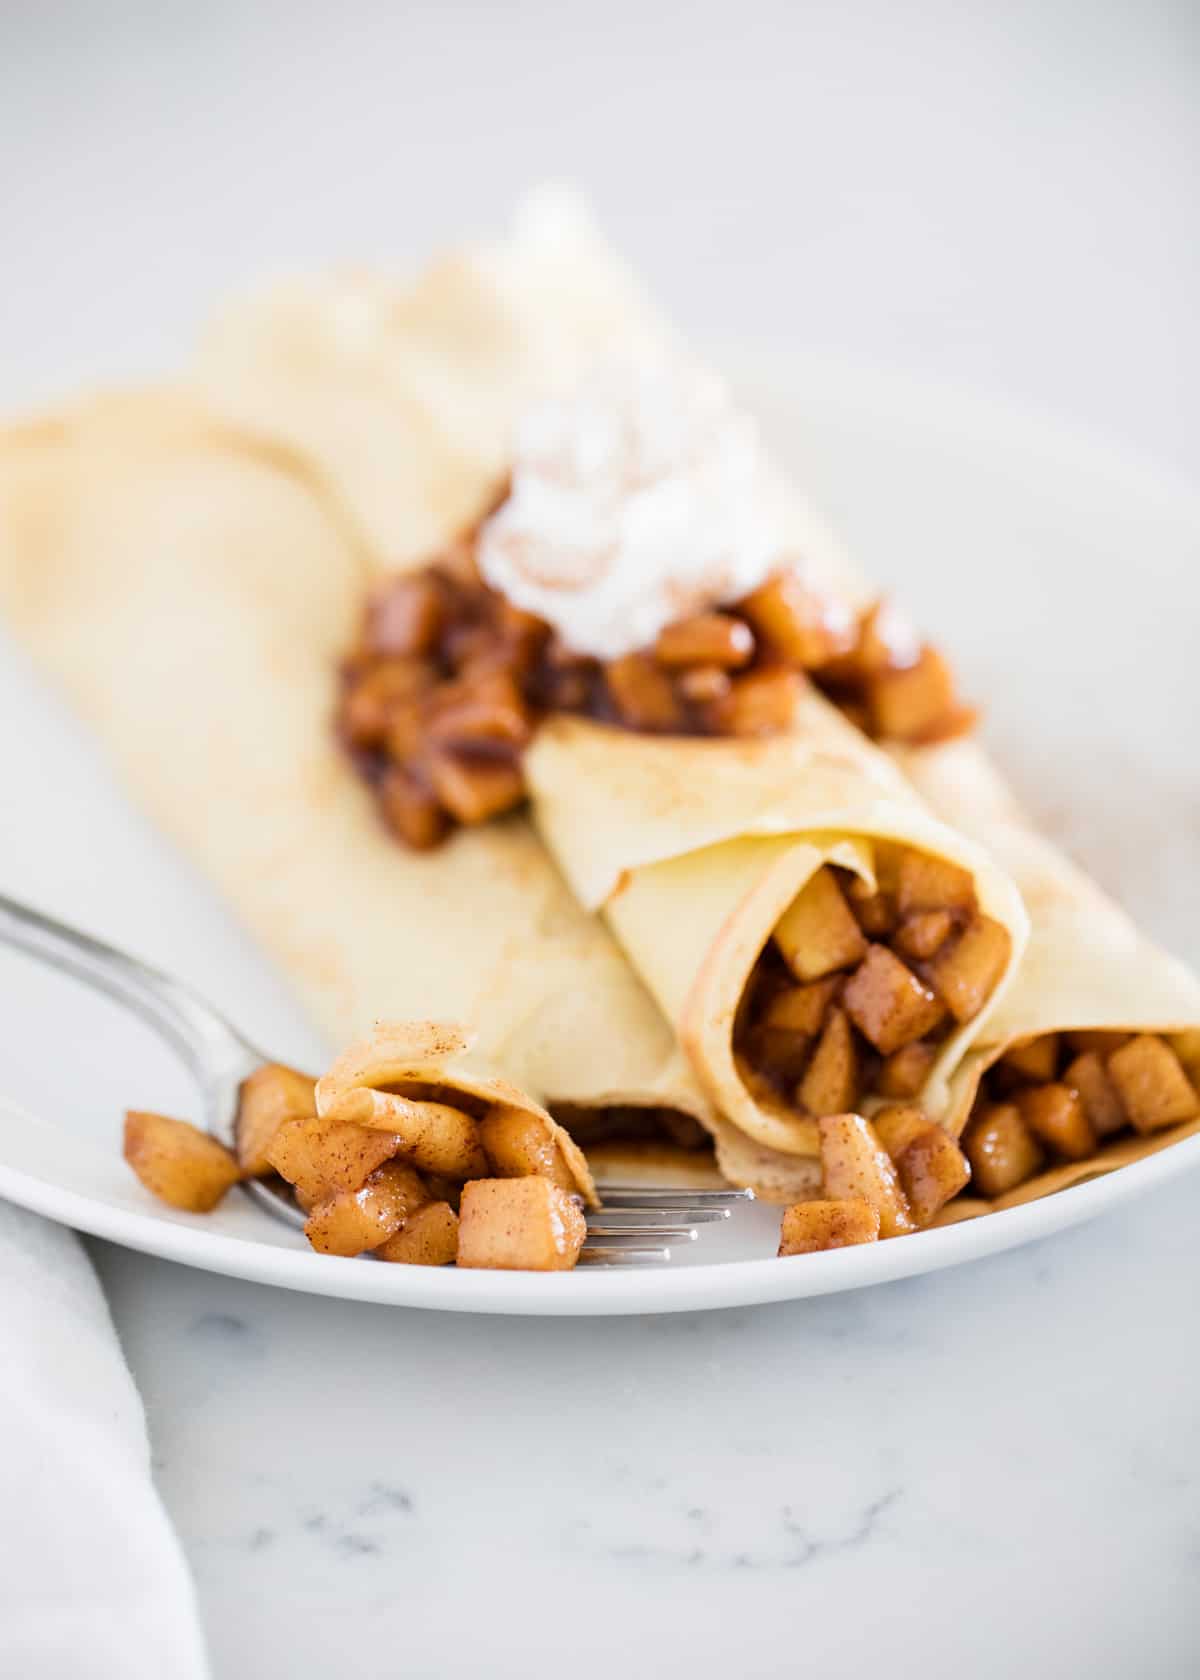 Crepes filled with apples.